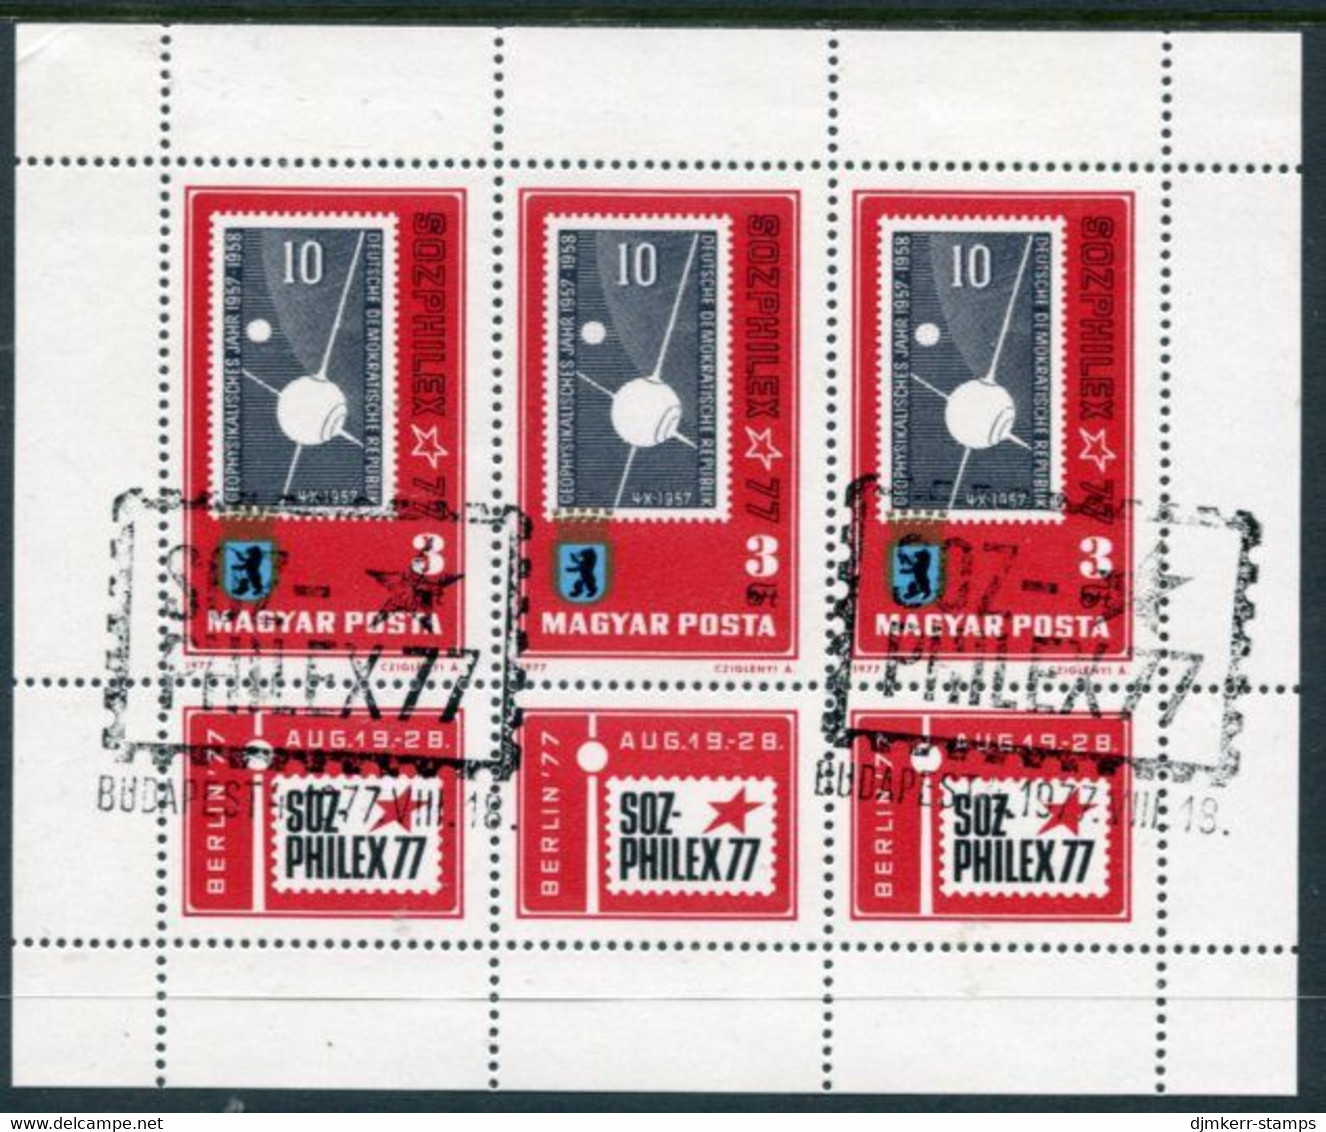 HUNGARY 1977 SOZPHILEX Stamp Exhibition Sheetlet Used.  Michel 3208 Kb - Used Stamps